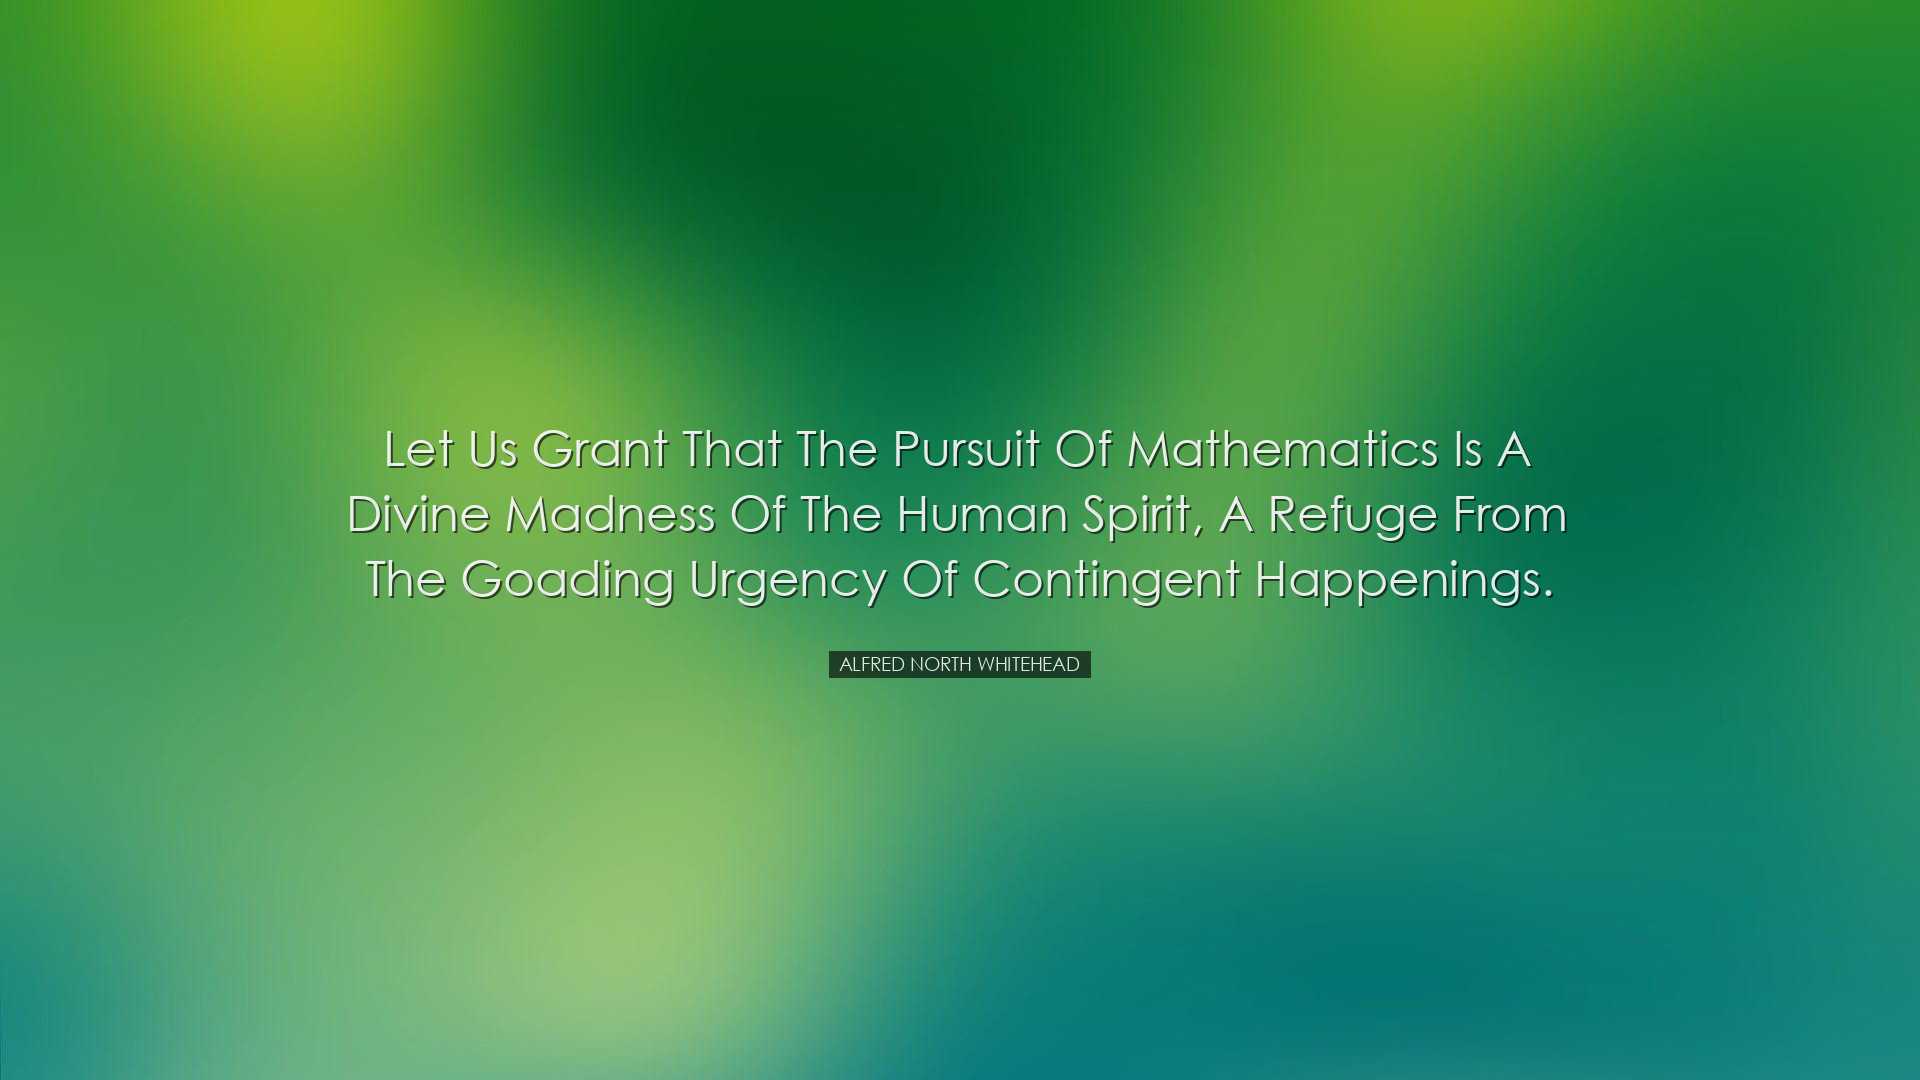 Let us grant that the pursuit of mathematics is a divine madness o